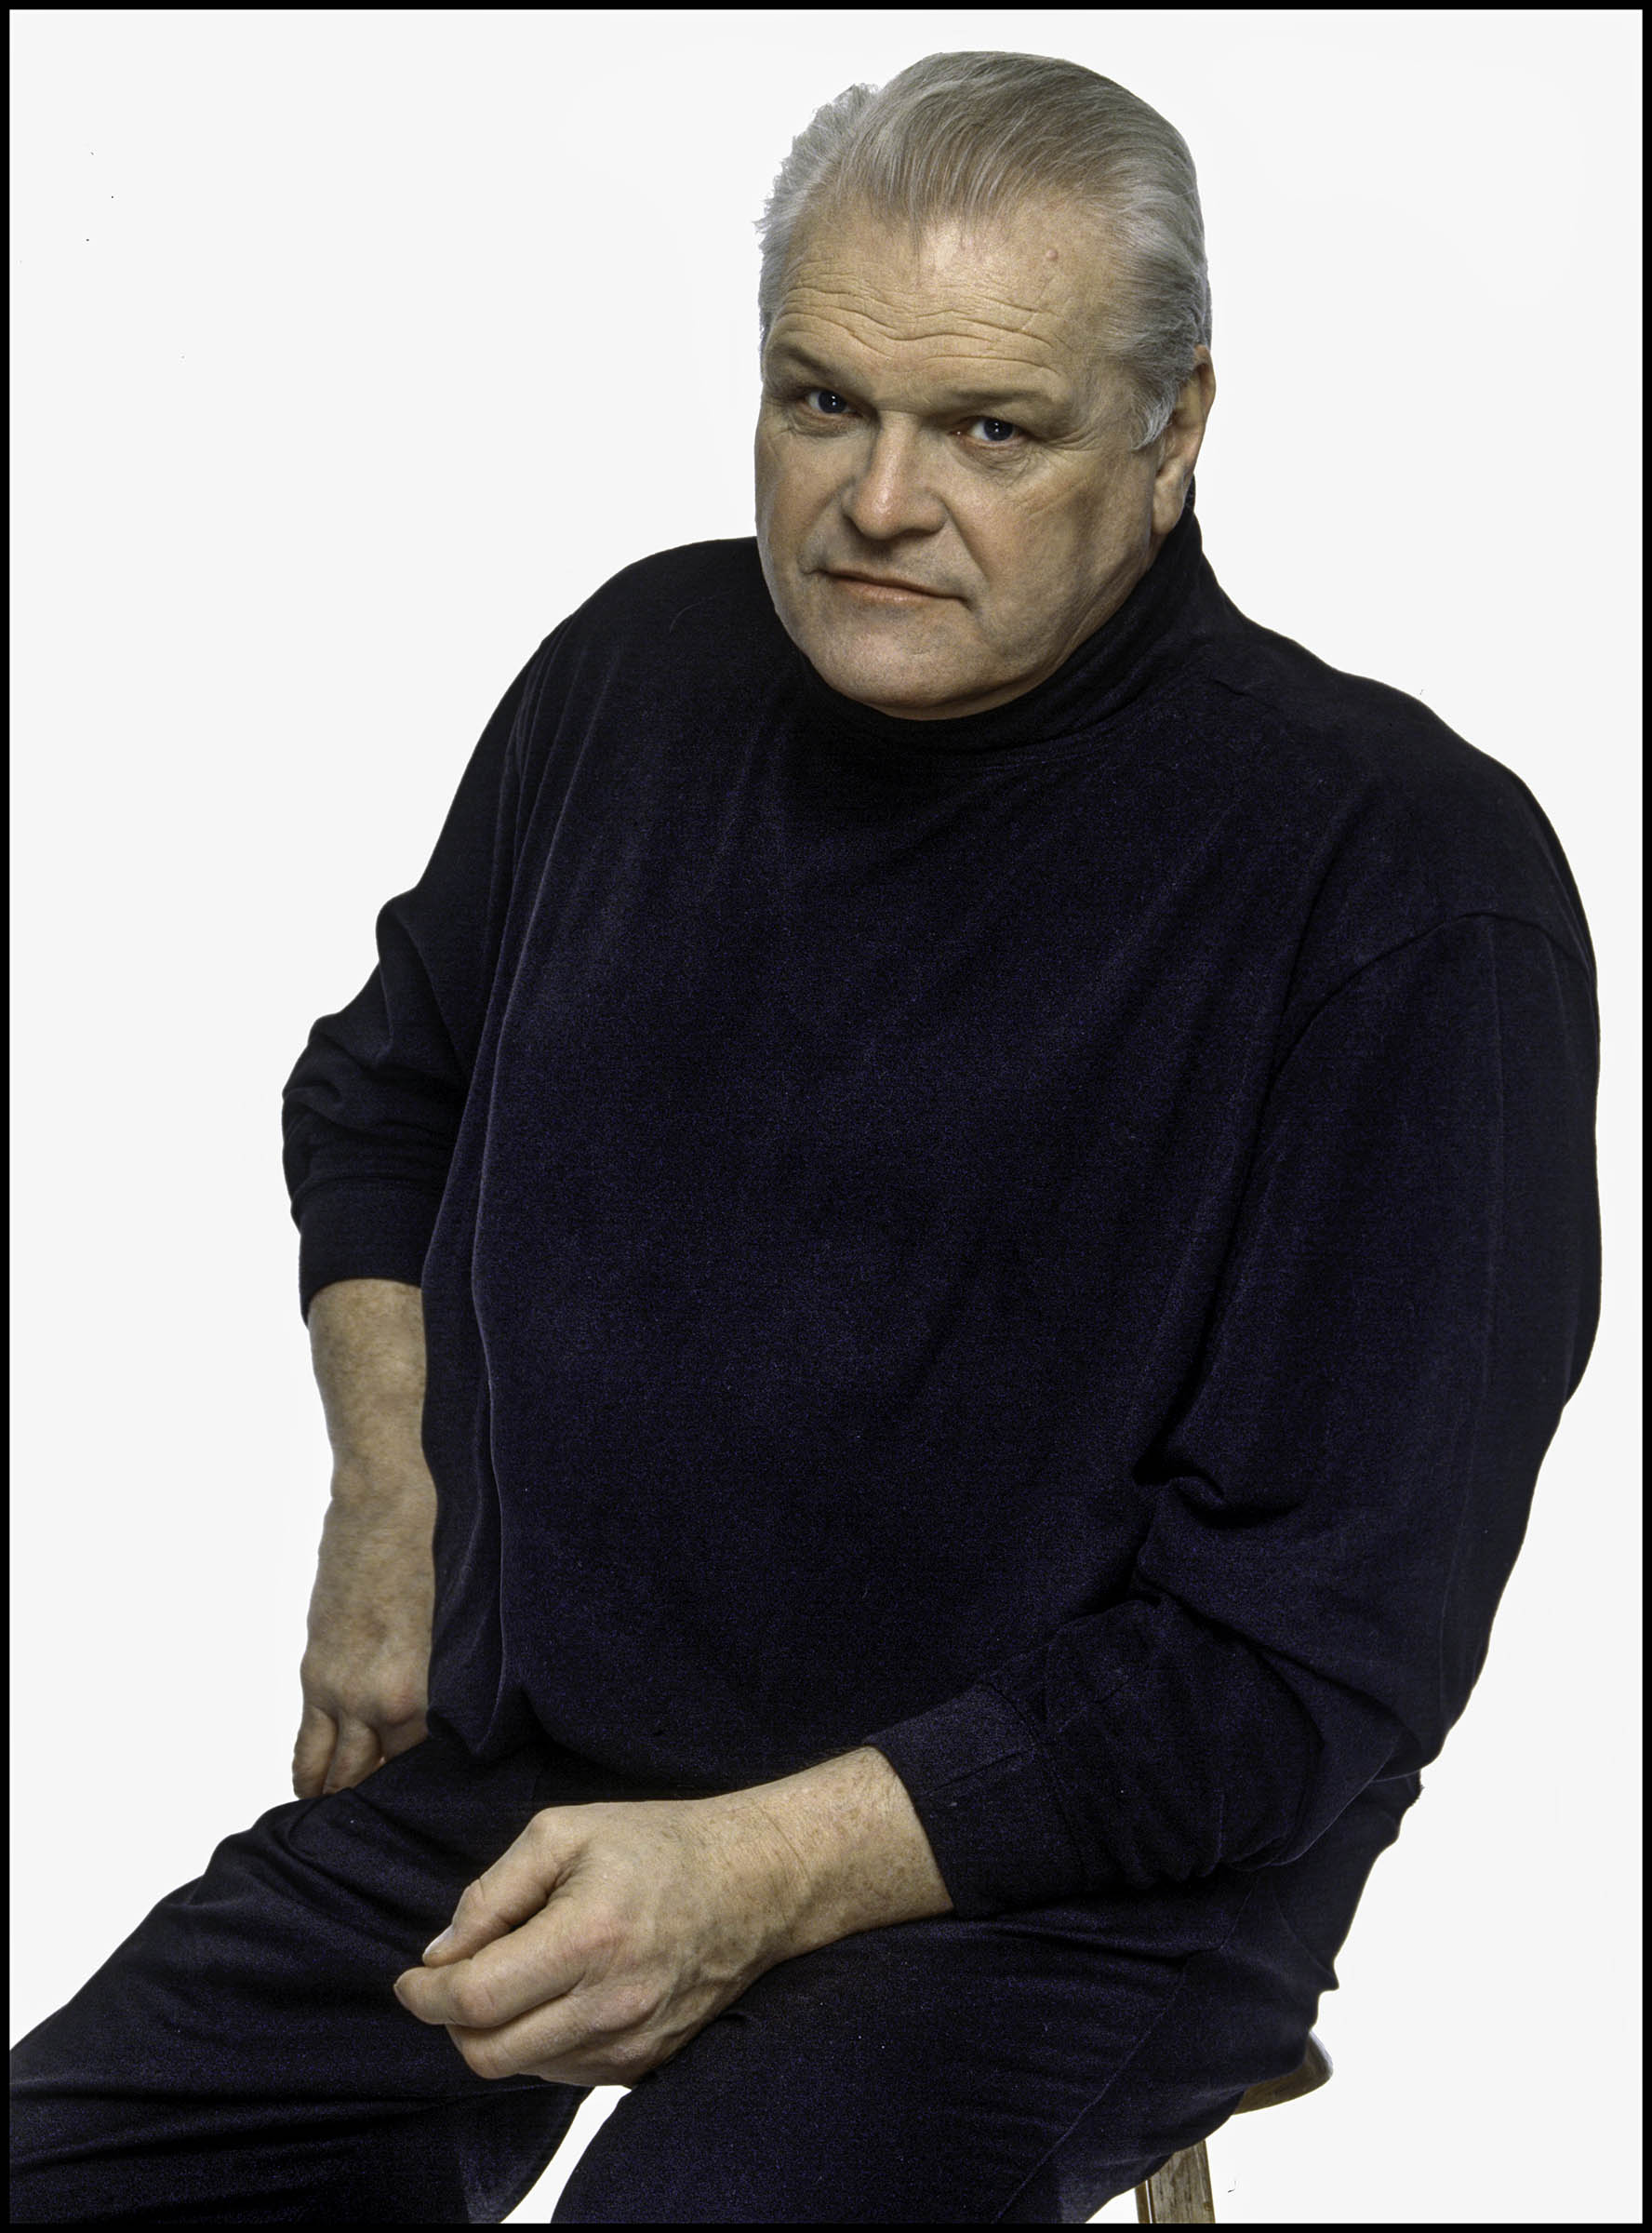 Brian Manion Dennehy was an American actor of stage, television, and film. He won two Tony Awards, an Olivier Award, and a Golden Globe, and received six Primetime Emmy Award nominations. Dennehy had roles in over 180 films and in many television and stage productions. His film roles included First Blood (1982), Gorky Park (1983), Silverado (1985), Cocoon (1985), F/X (1986), Presumed Innocent (1990), Romeo + Juliet (1996), Ratatouille (2007), and Knight of Cups (2015). Dennehy won the Golden Globe Award for Best Actor in a Miniseries or Television Film for his role as Willy Loman in the television film Death of a Salesman (2000).  According to Variety, Dennehy was "perhaps the foremost living interpreter" of playwright Eugene O